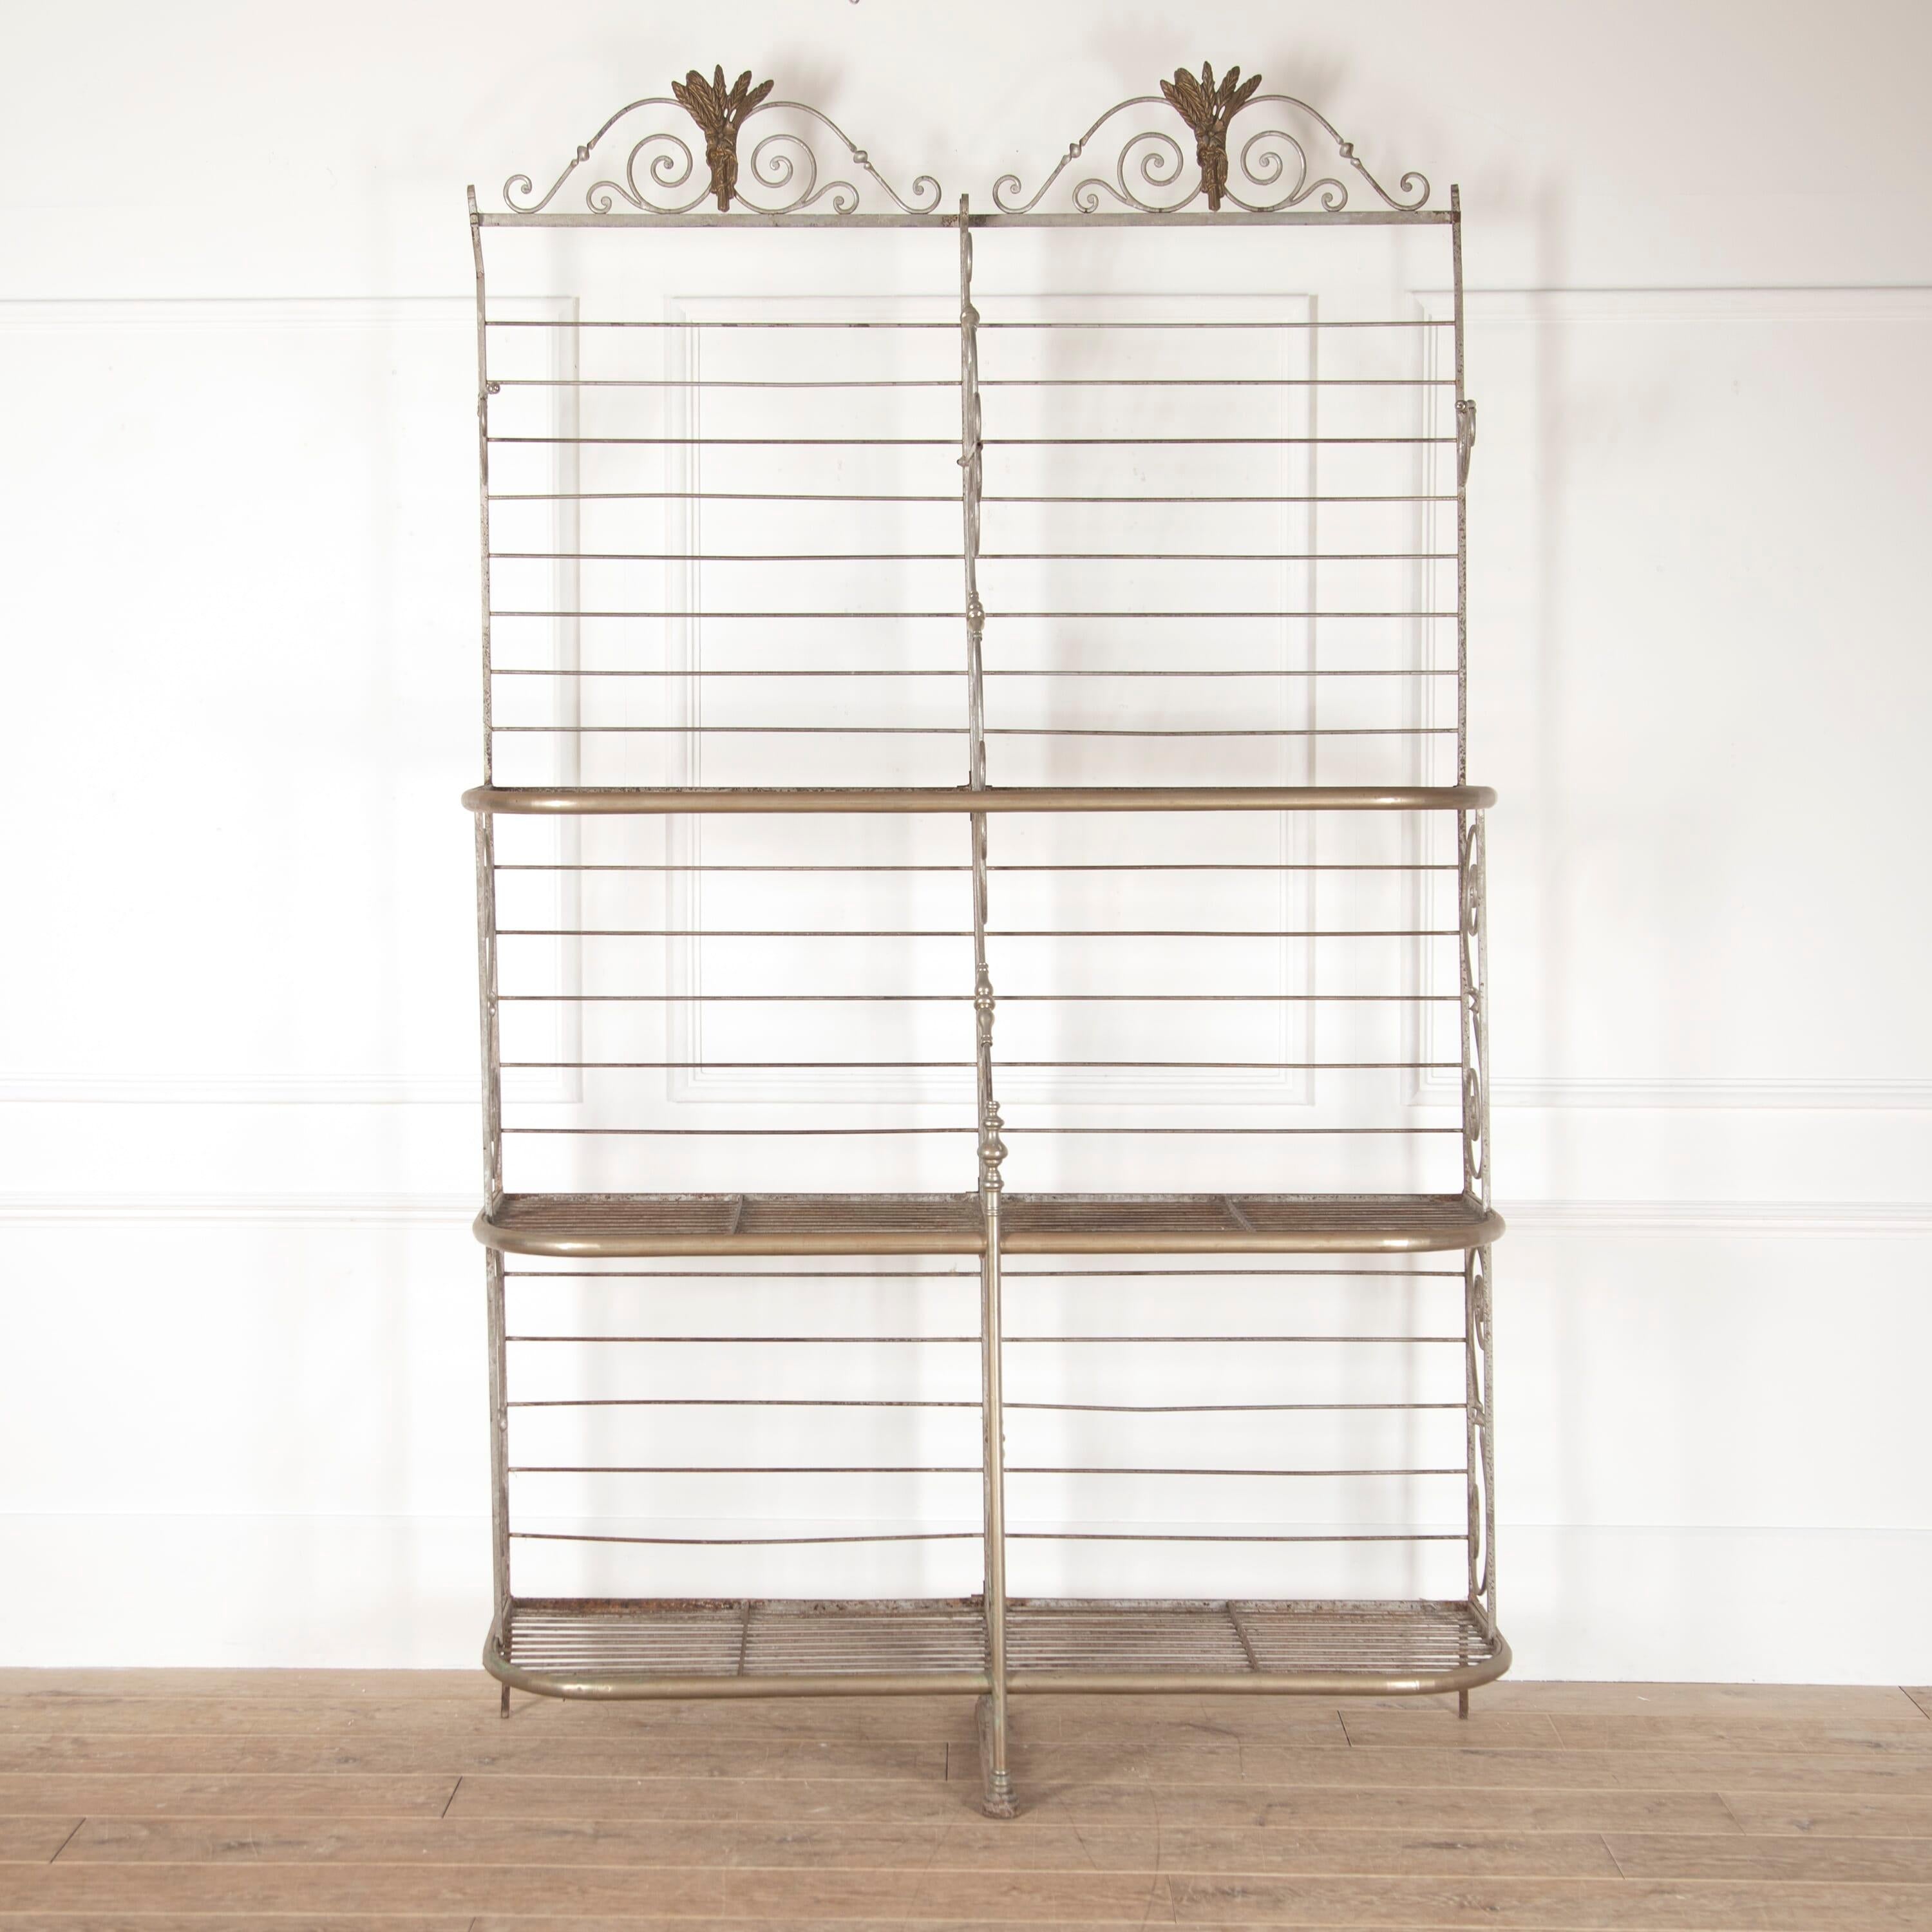 Wonderful French iron and brass-plated baker's rack, Circa 1930.

This highly decorative rack features double arches to the top, with plentiful scrolling forms throughout the frame. 

Offering three protruding racks, this baker's rack is both